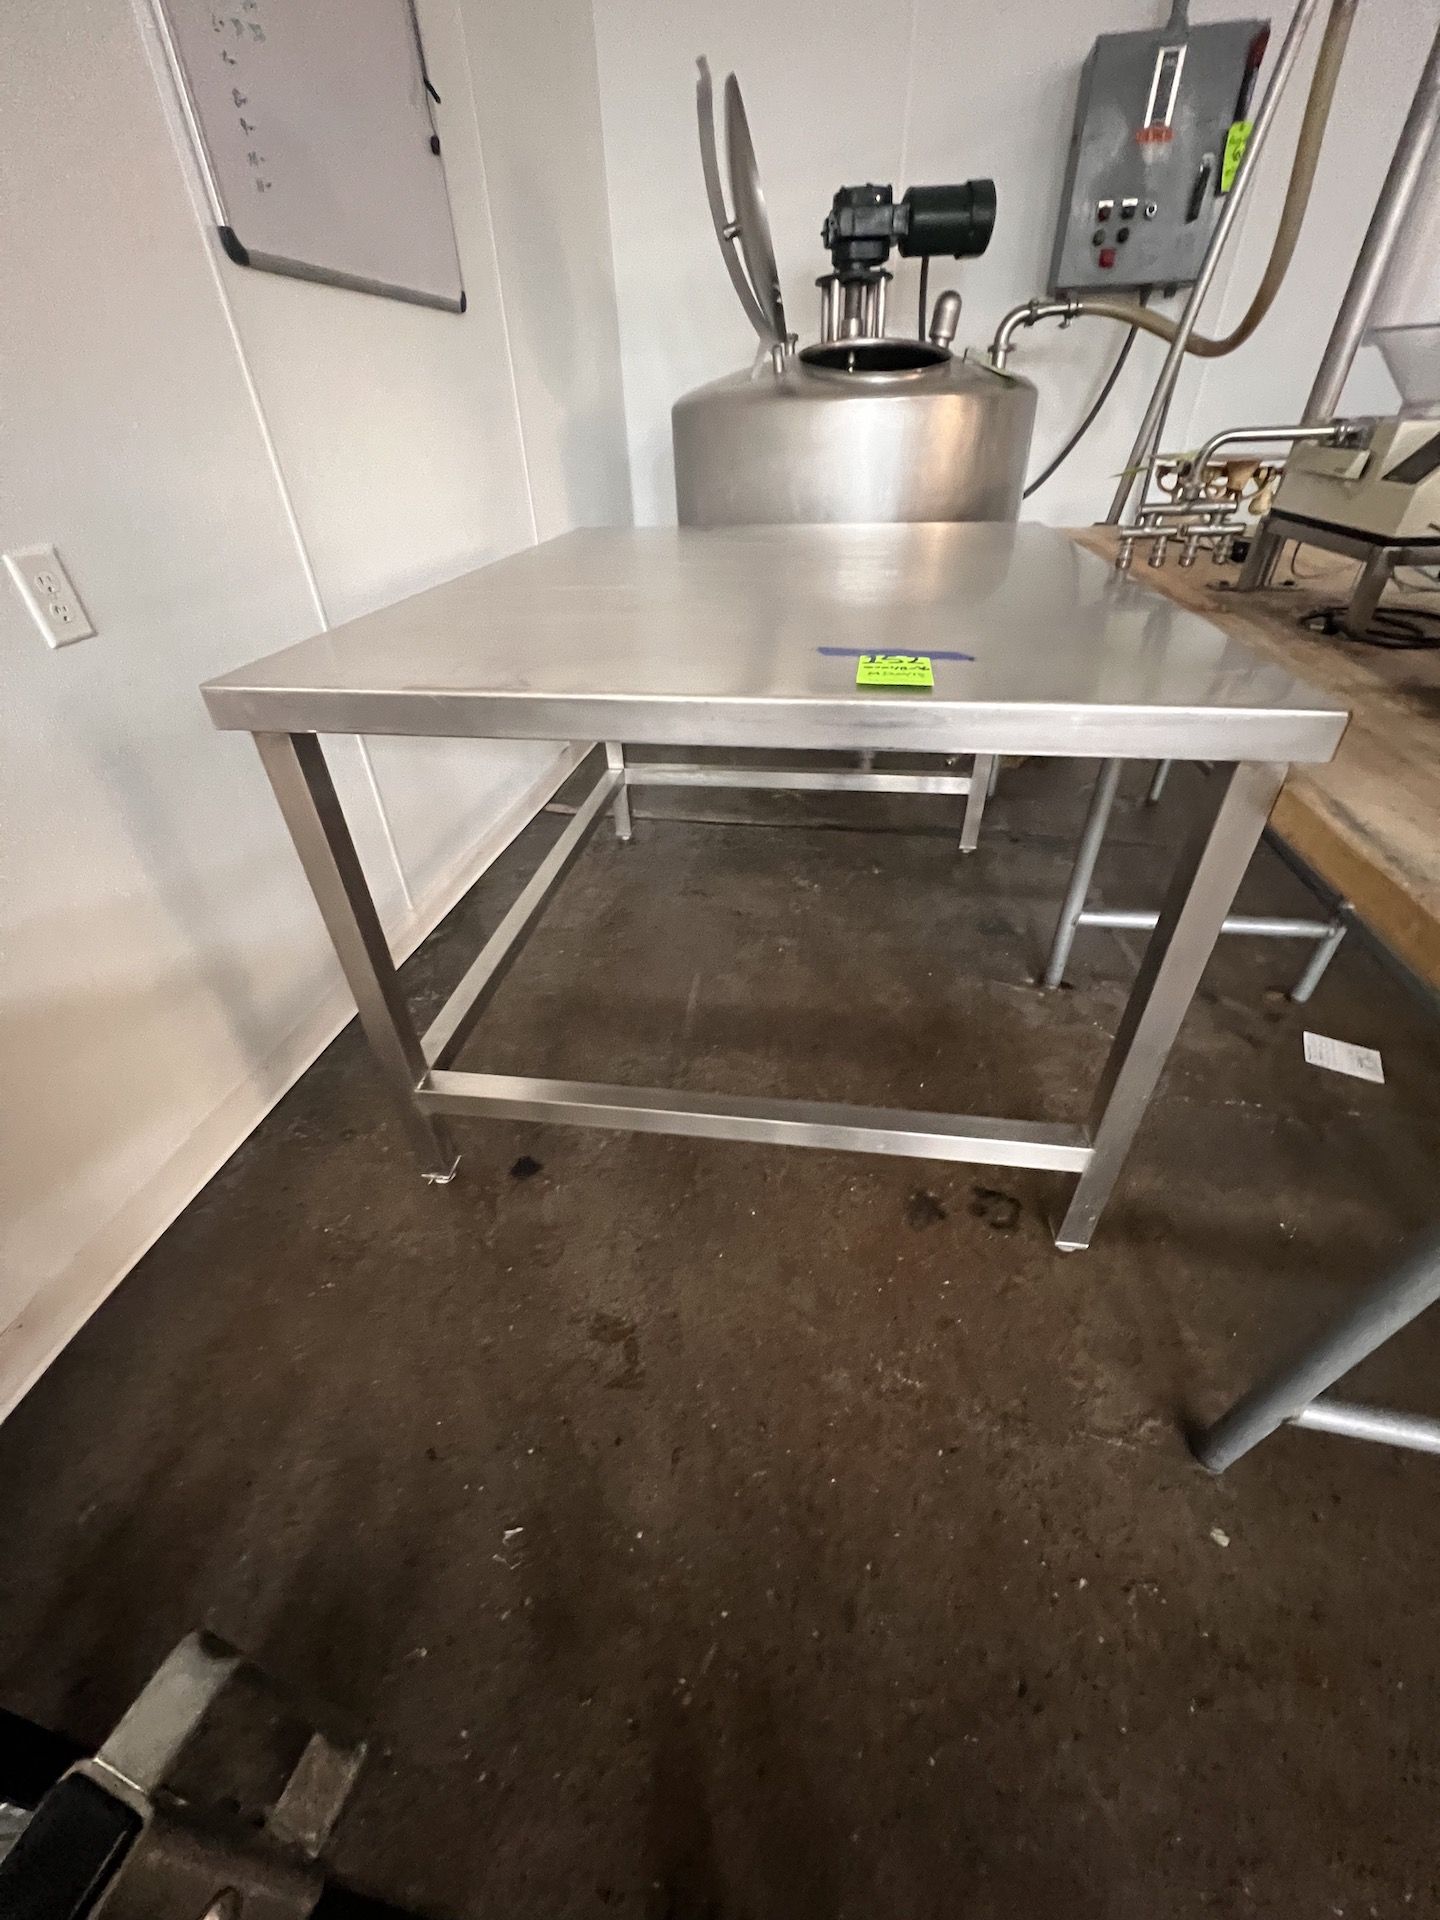 S/S TABLE, APPROX. DIMS: 60 IN. X 48 IN. X 36 IN.